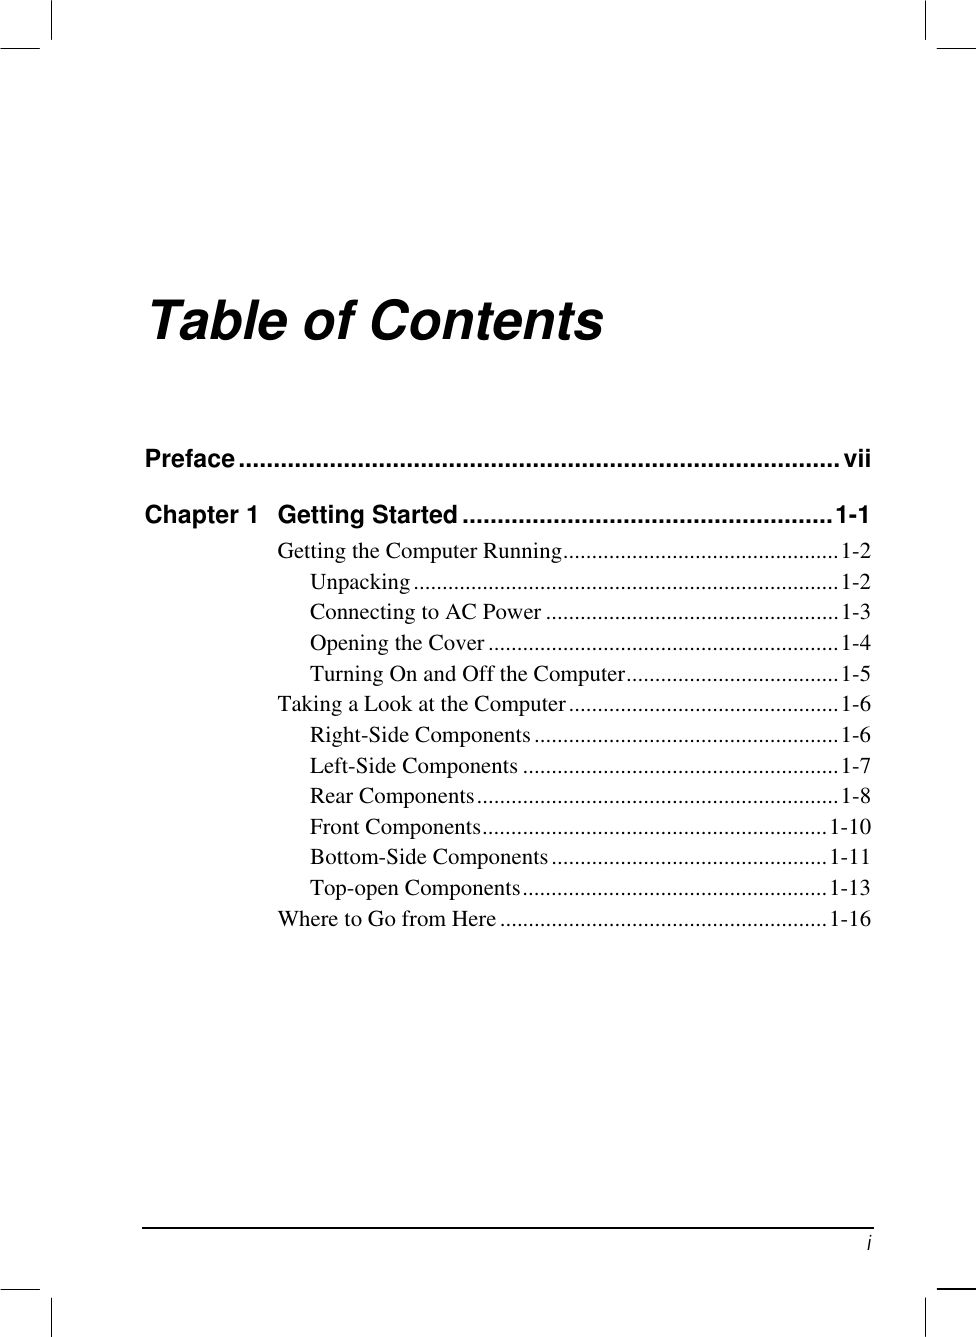   i Table of Contents Preface......................................................................................vii Chapter 1  Getting Started.....................................................1-1 Getting the Computer Running................................................1-2 Unpacking..........................................................................1-2 Connecting to AC Power ...................................................1-3 Opening the Cover .............................................................1-4 Turning On and Off the Computer.....................................1-5 Taking a Look at the Computer...............................................1-6 Right-Side Components.....................................................1-6 Left-Side Components .......................................................1-7 Rear Components...............................................................1-8 Front Components............................................................1-10 Bottom-Side Components................................................1-11 Top-open Components.....................................................1-13 Where to Go from Here.........................................................1-16 